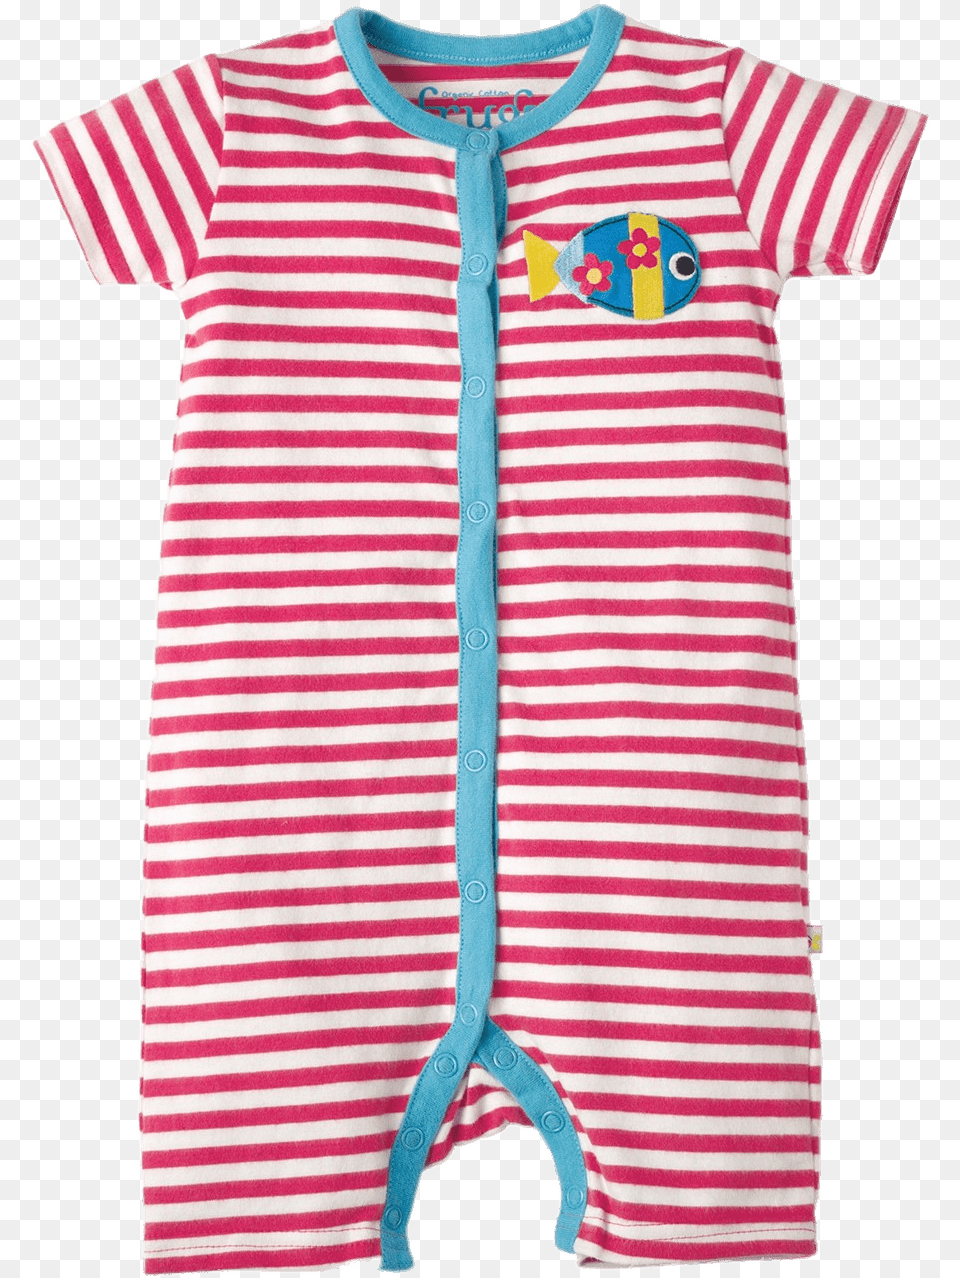 Red And White Striped Baby Romper Winnie The Pooh White And Yellow Striped Shirt, Clothing, T-shirt, Pajamas Free Png